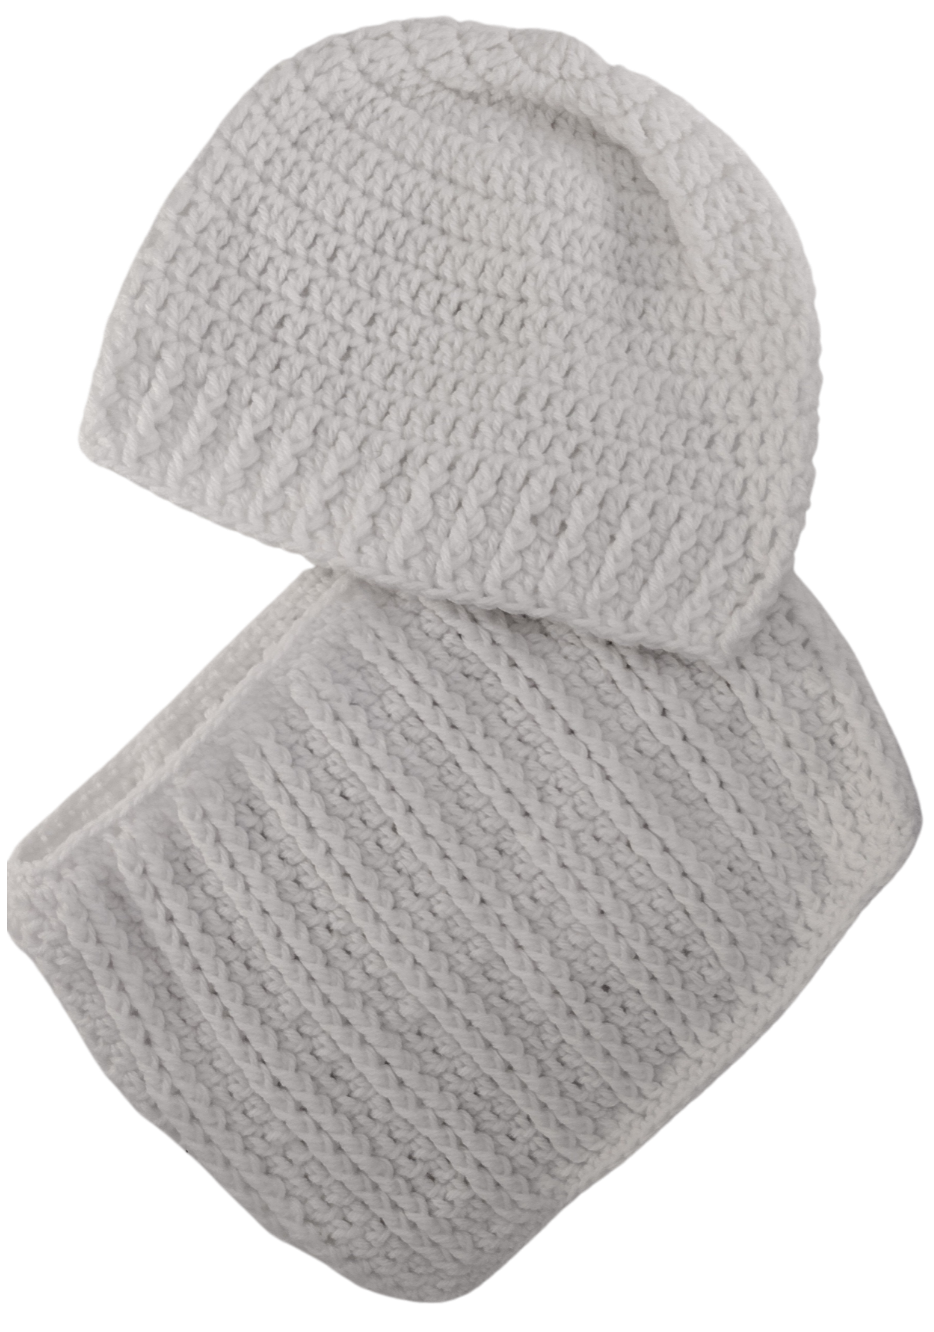 White Acrylic Yarn Crochet Adult Beanie and Scarf Set. Perfect Gift for Her or a Gift For Him Unisex Scarf Set.